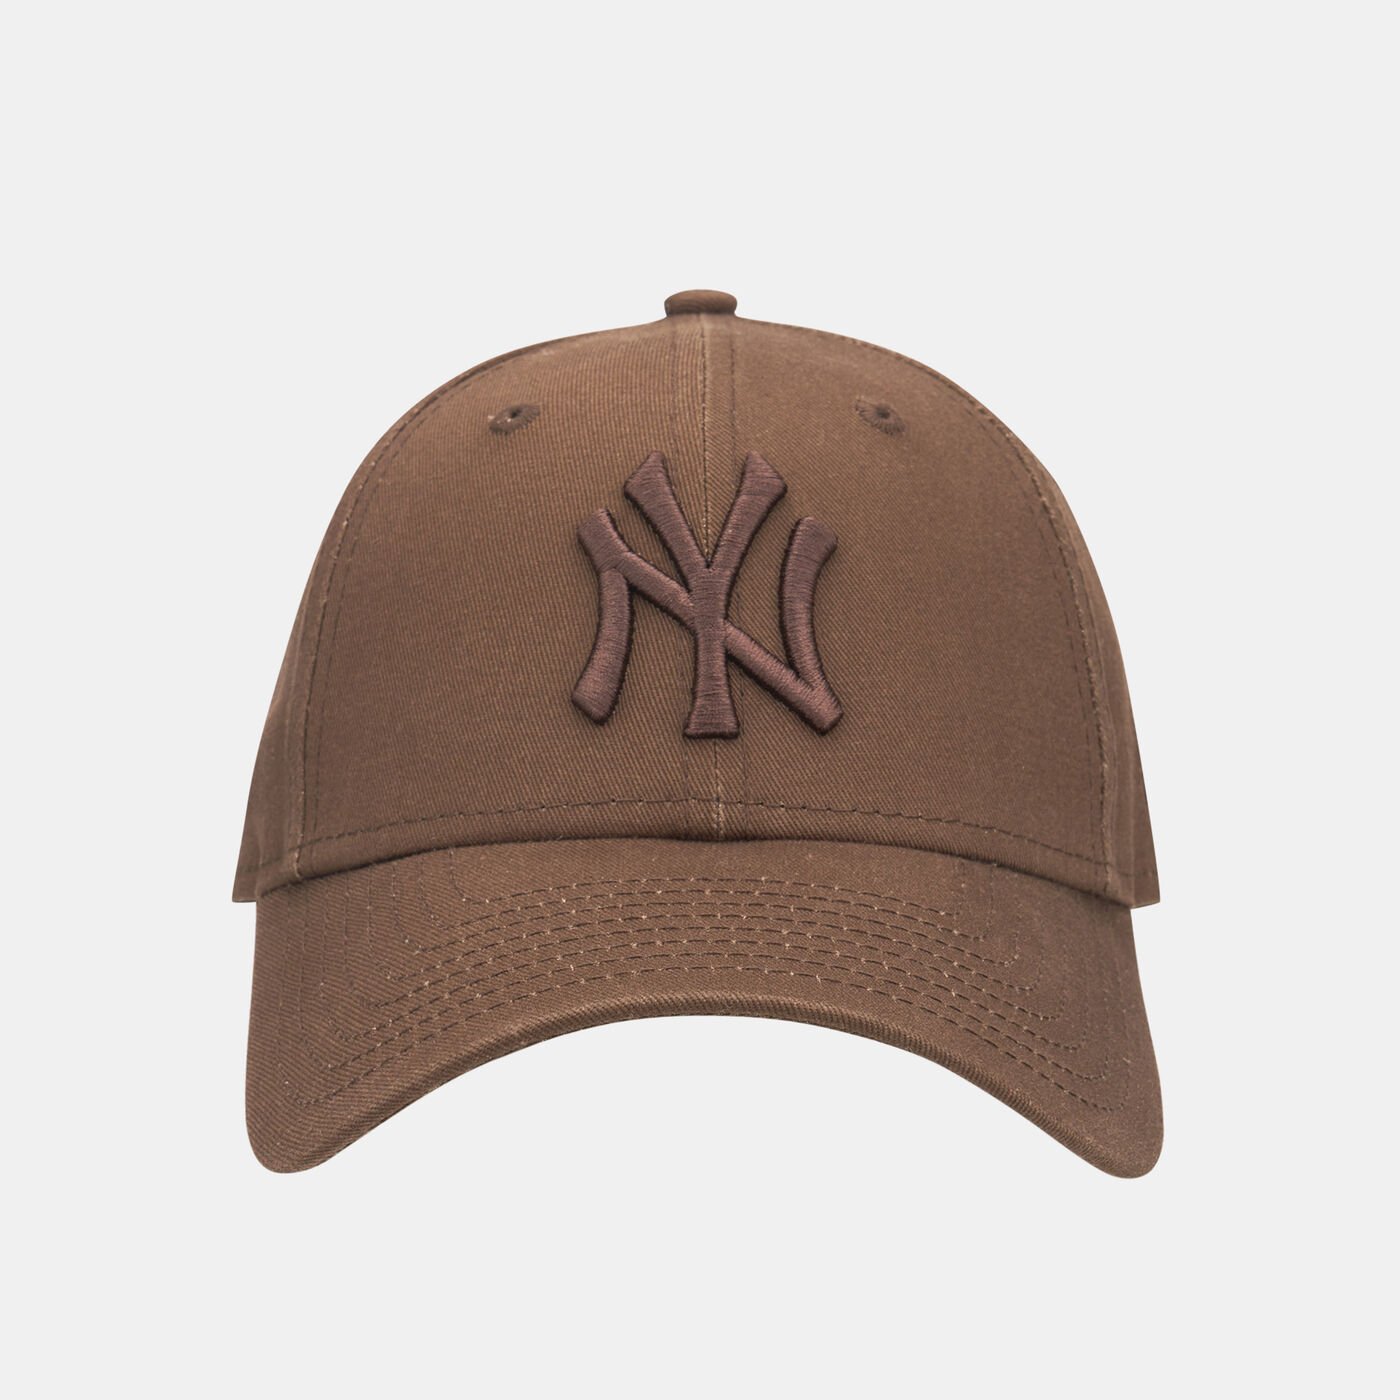 Women's MLB New York Yankees League Essential 9FORTY Cap